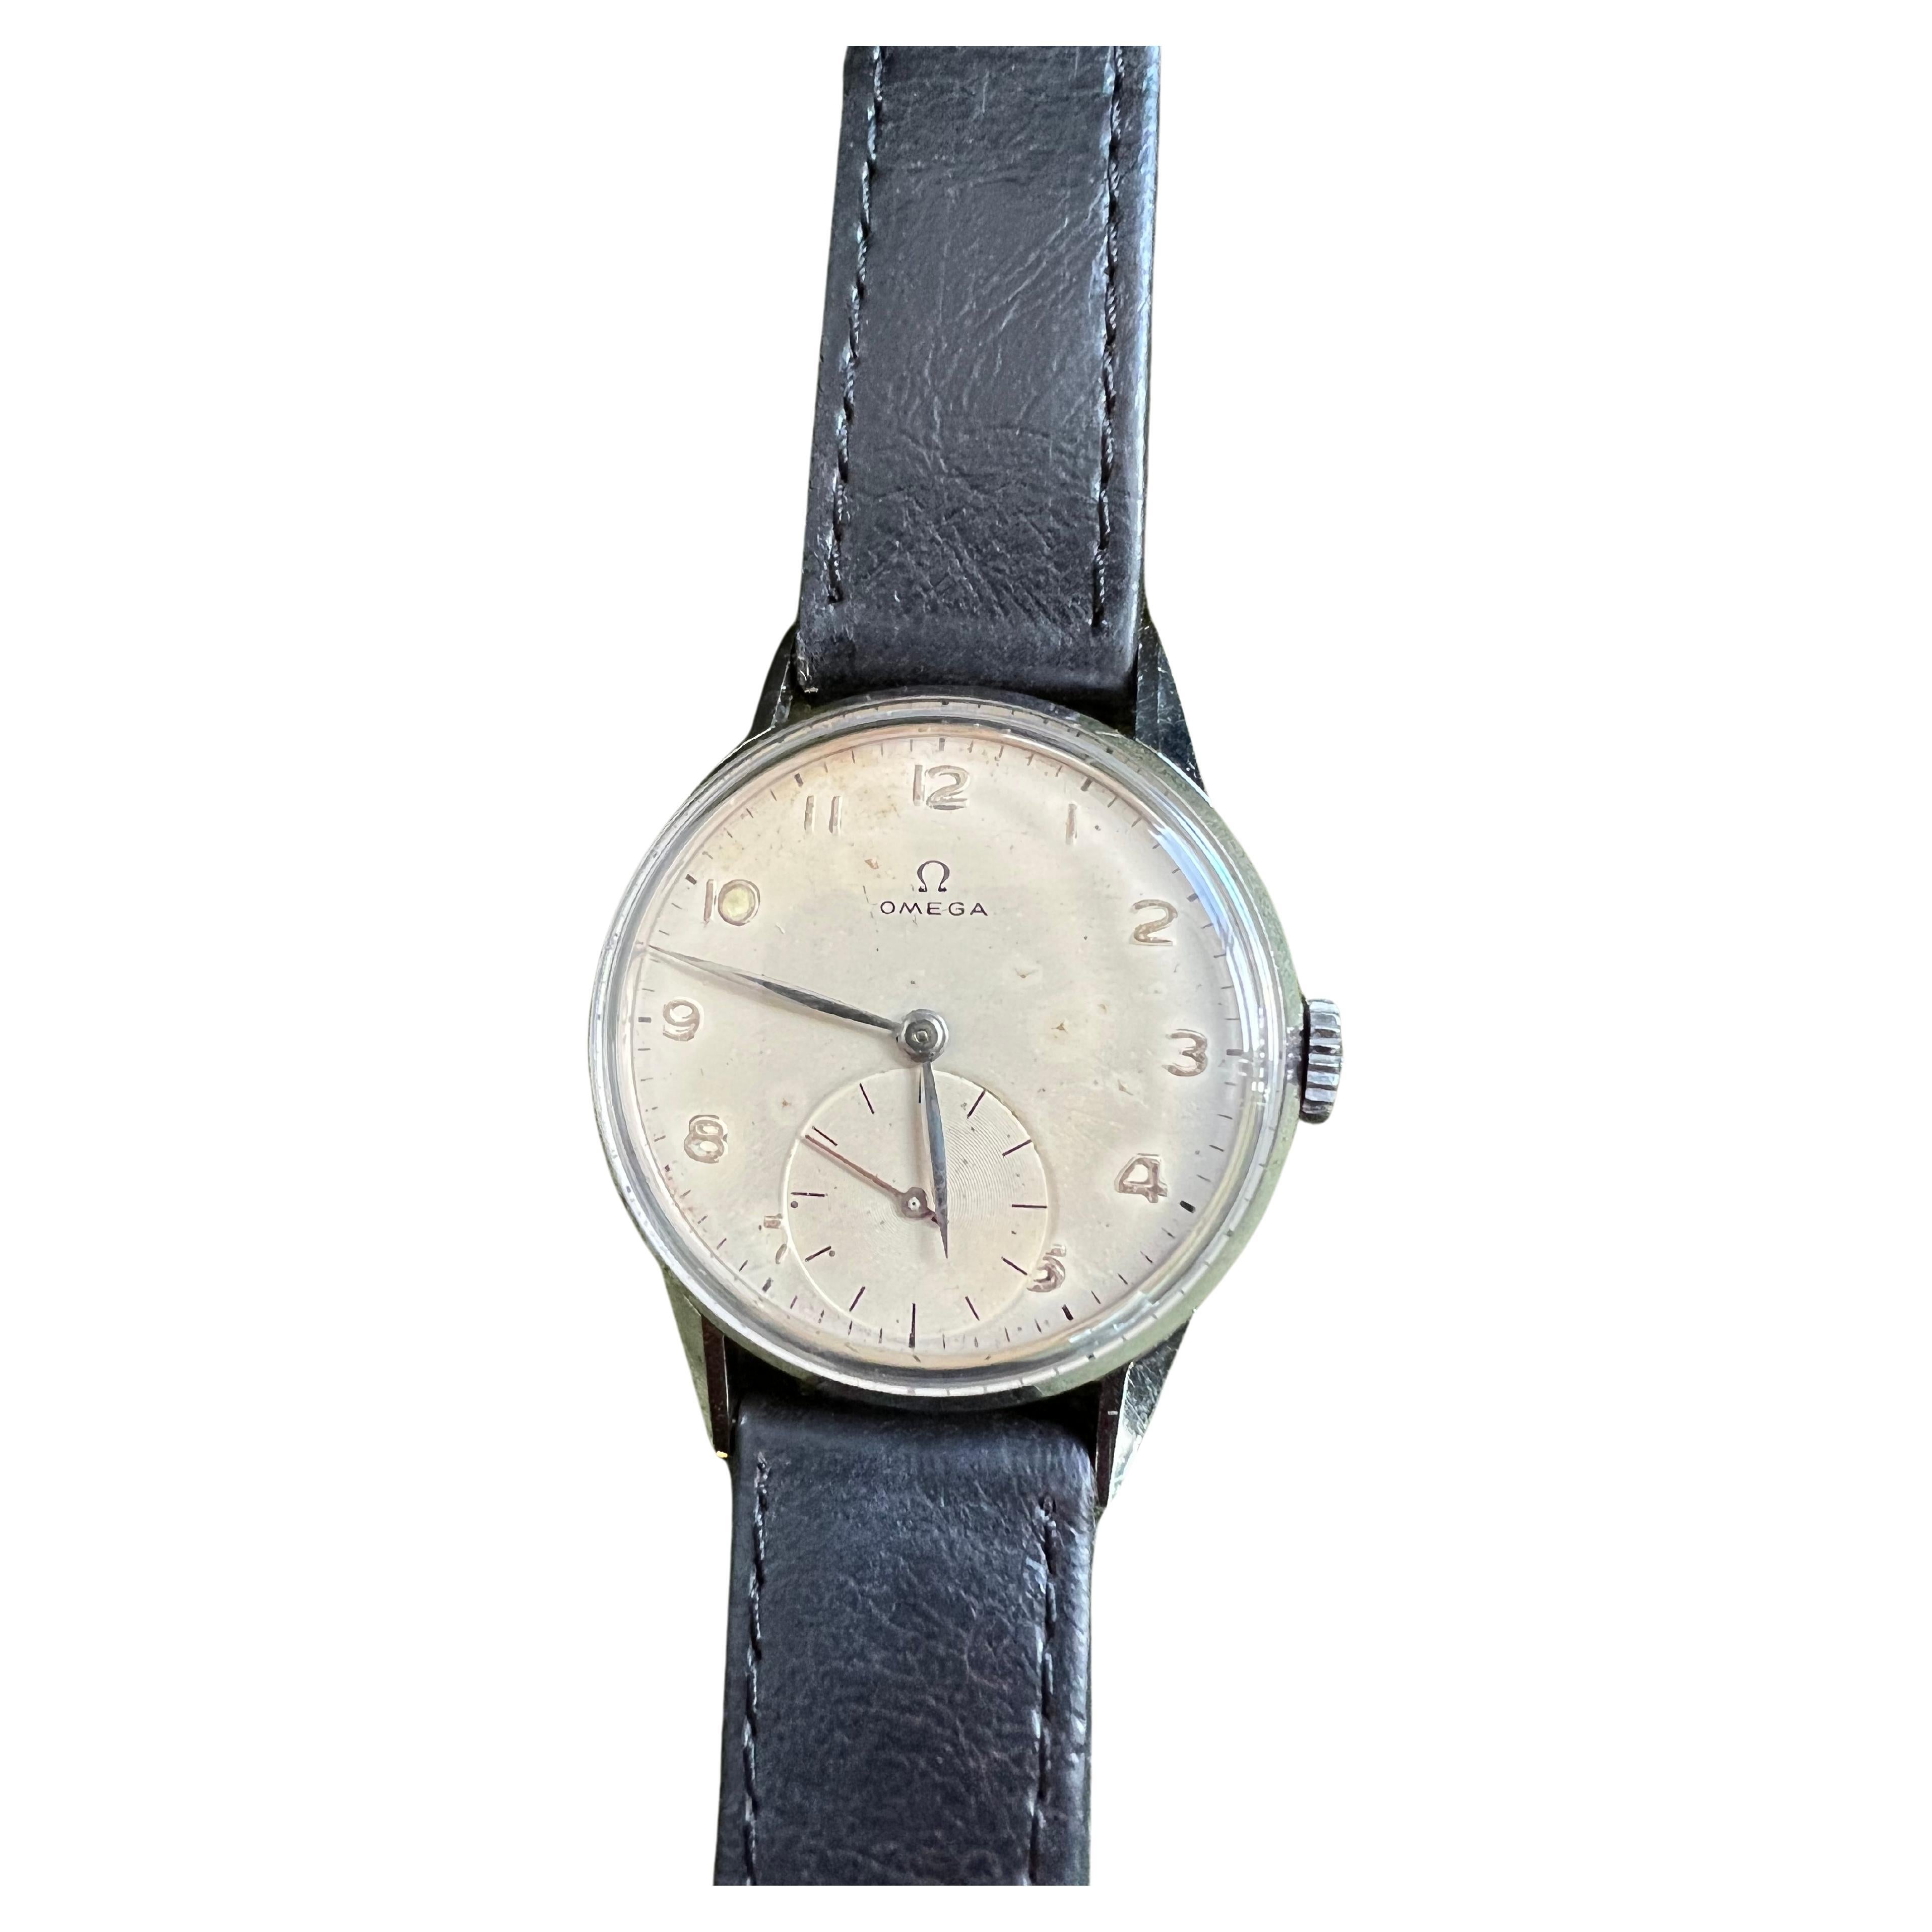 Rare Vintage 1944 Omega Chronometer Watch US Navy Issued
What is amazing about this watch is that it is in perfect working condition and also looks amazing to its age. This is a piece of history and at the same time most elegant and classic watch,